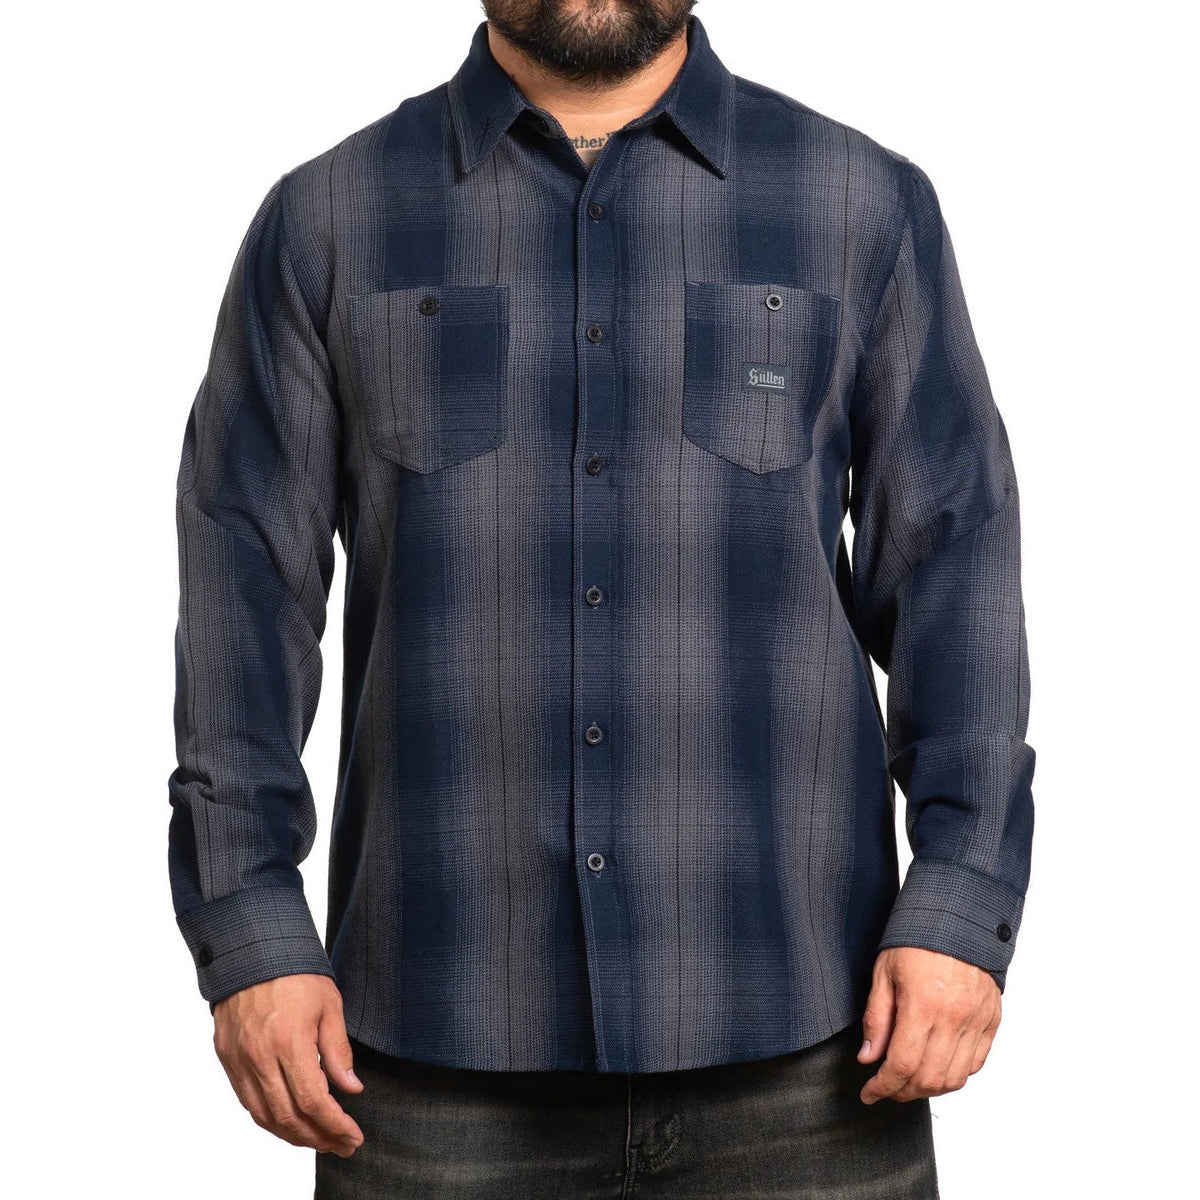 SULLEN-ART-COLLECTIVE-CAMINO-FLANNEL - FLANNEL - Synik Clothing - synikclothing.com